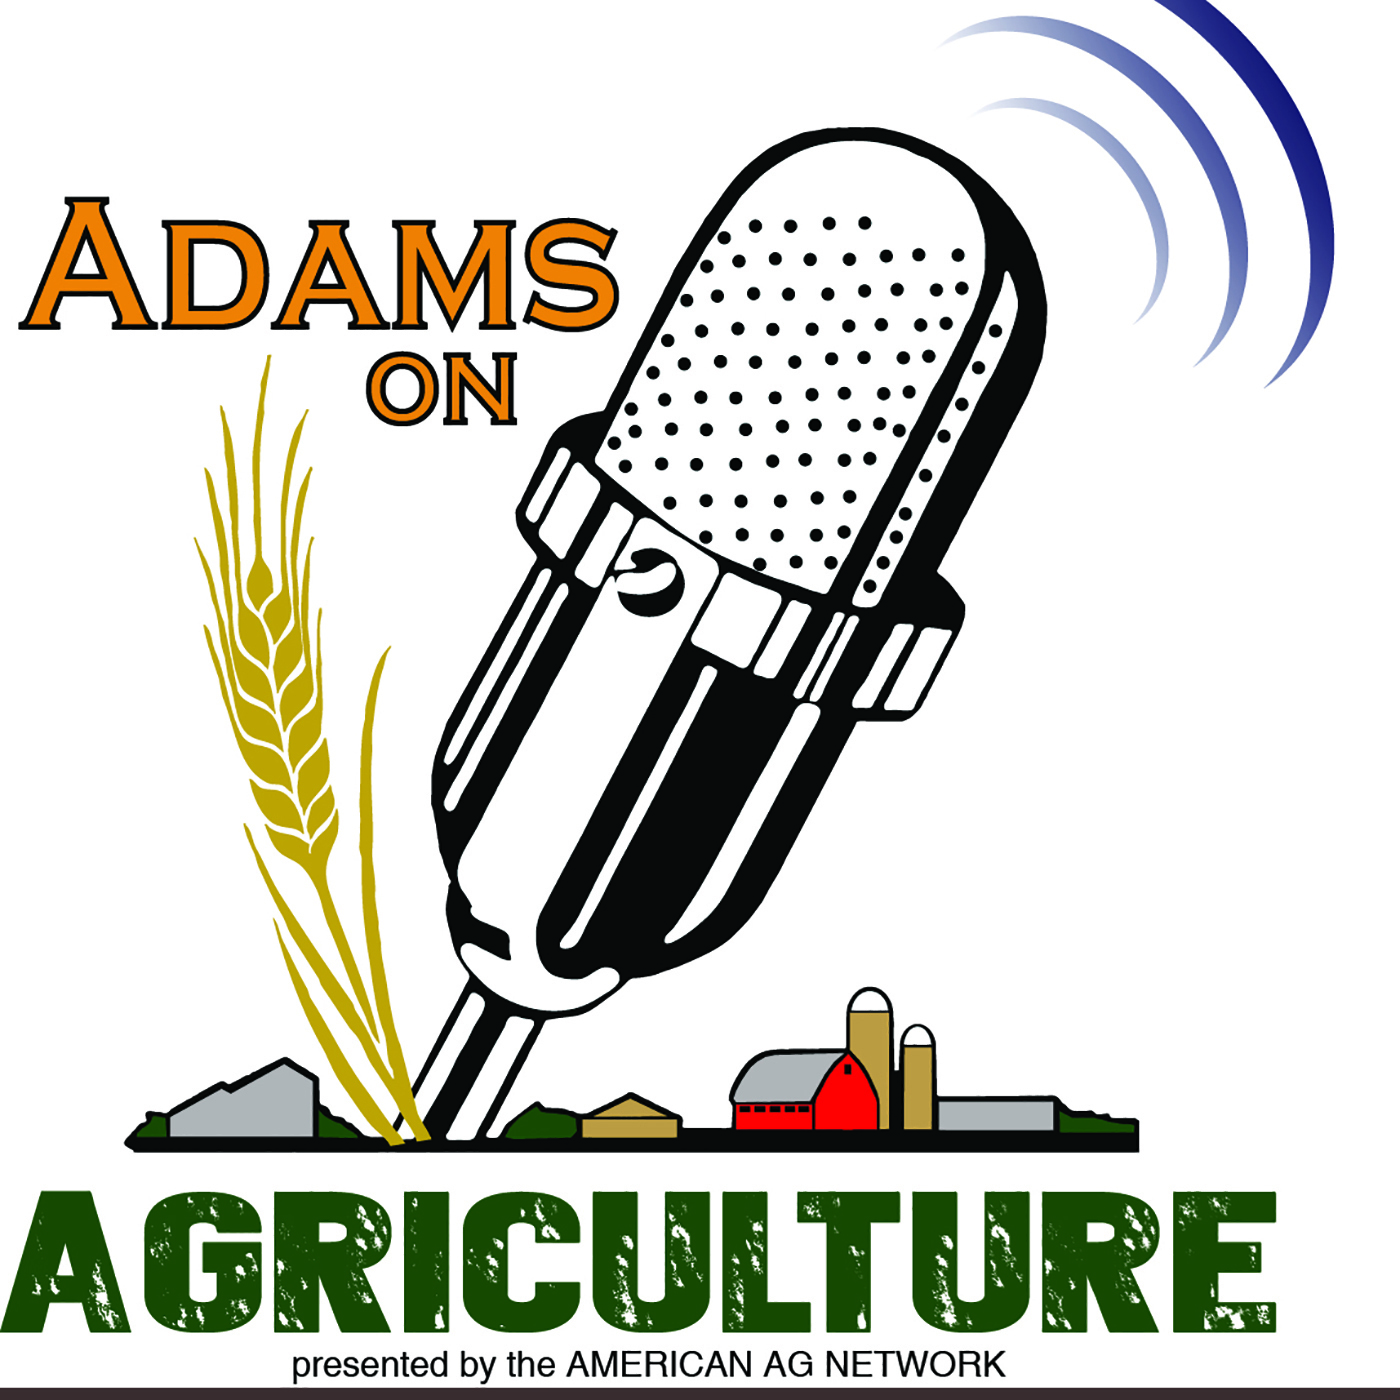 Adams on Agriculture - September 4, 2018